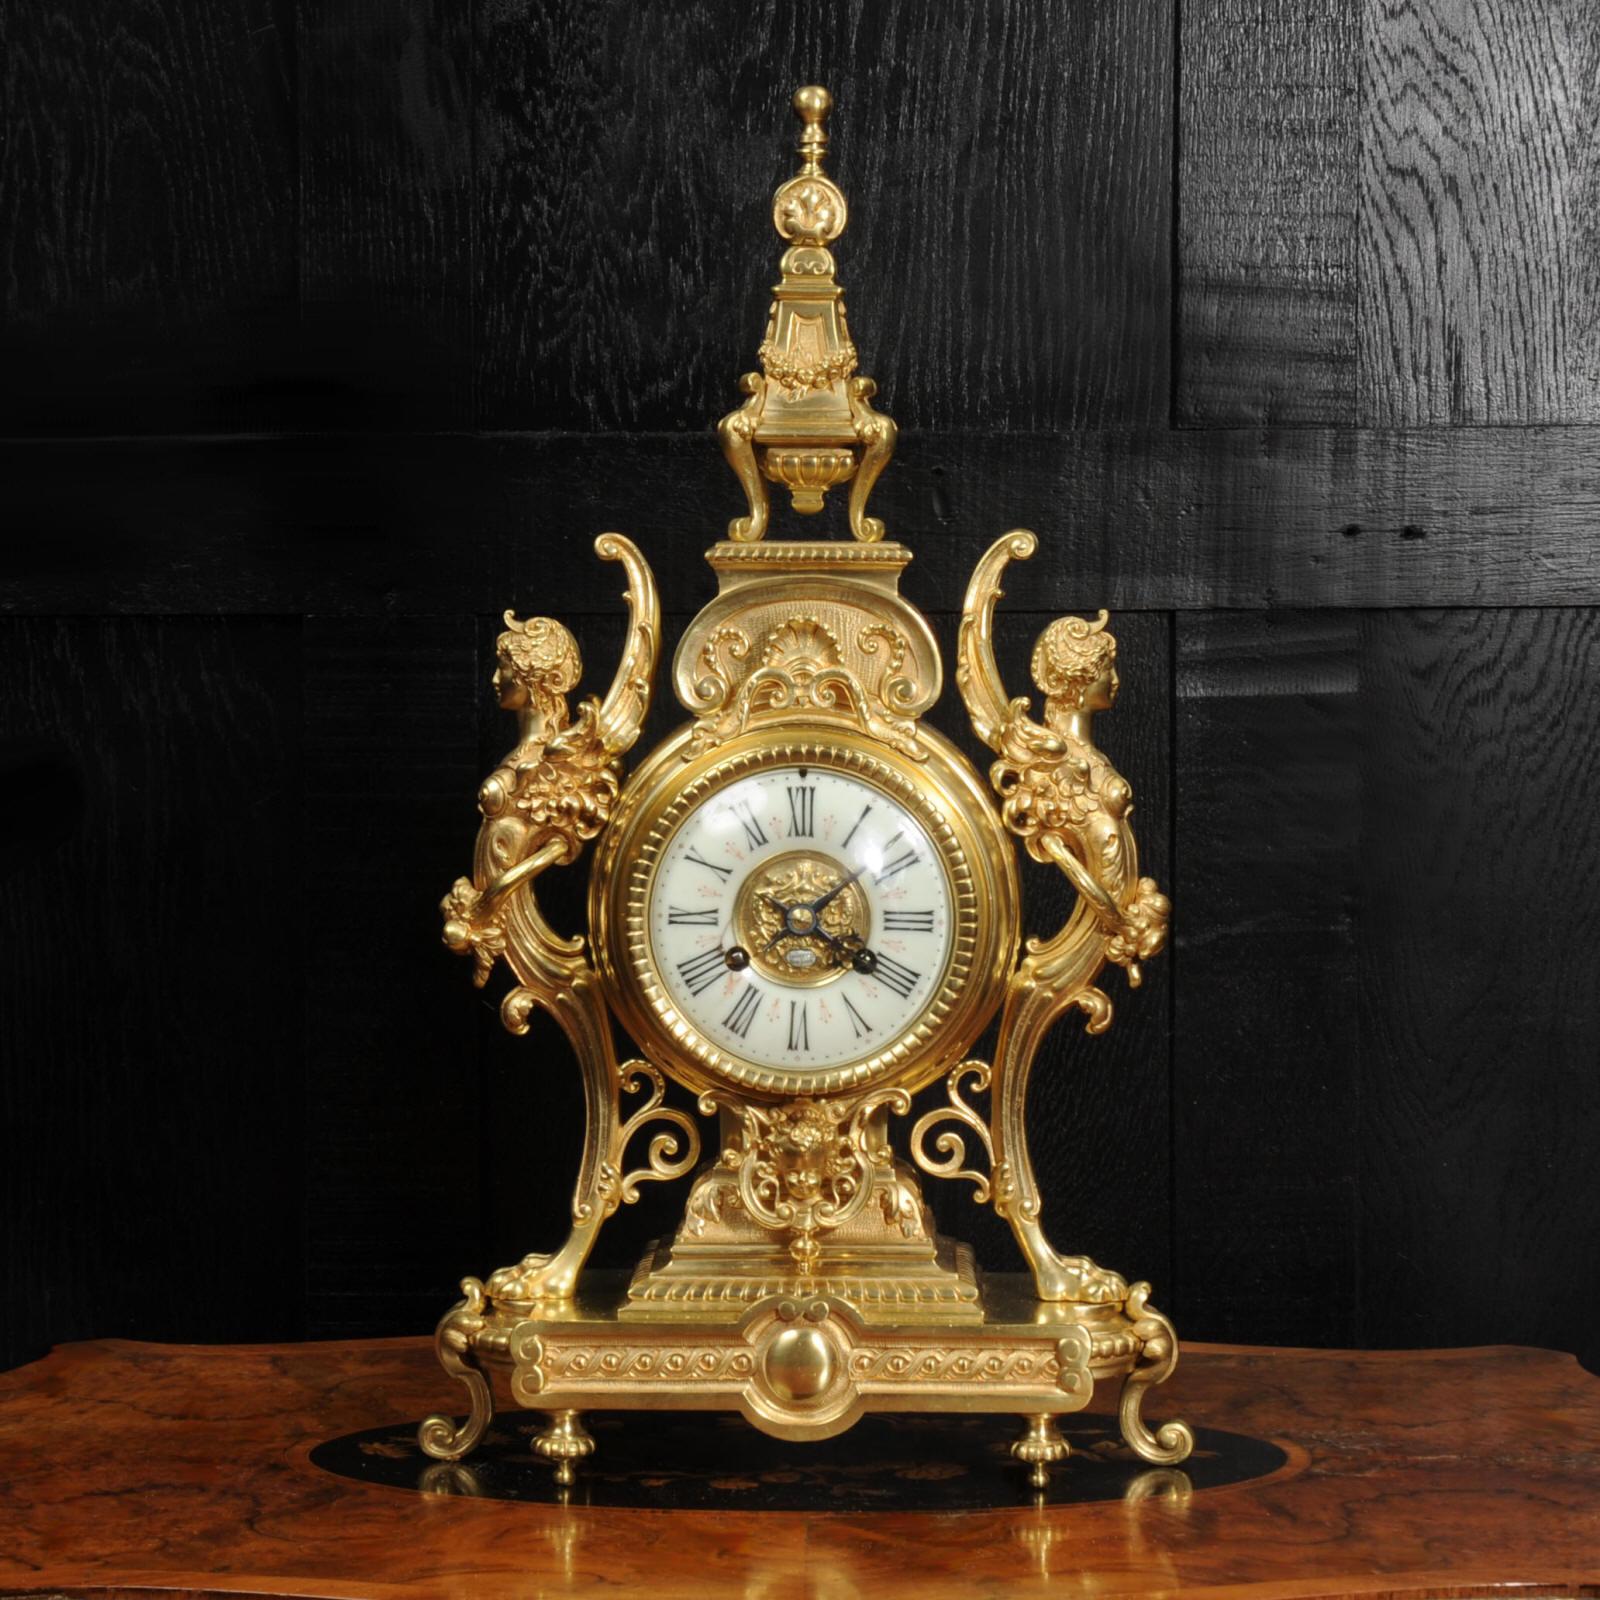 A large and superb gilt bronze antique French clock, retailed by Tiffany & Co, New York. Beautifully modelled in the Baroque style most likely by the famous Bronze founder Maison Baguès. The clock is mounted in a drum supported by winged goddesses